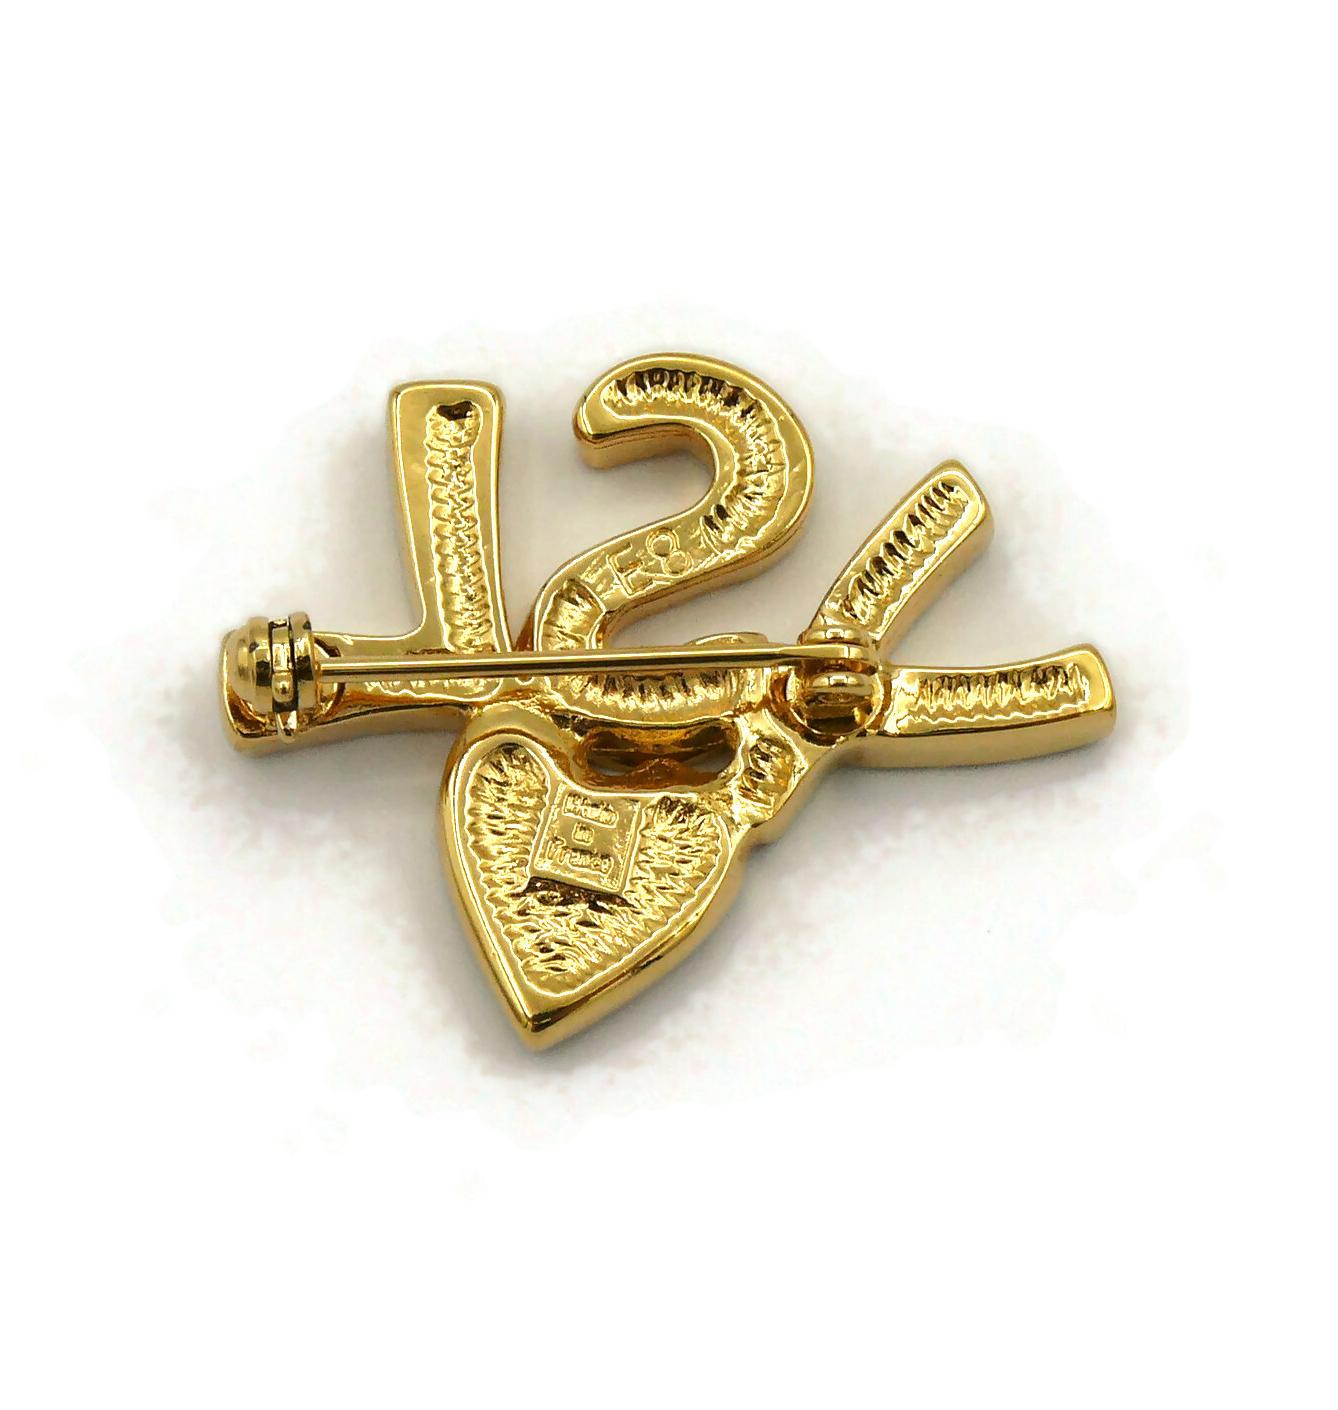 YVES SAINT LAURENT YSL Vintage Jewelled Initials Heart Brooch For Sale 2